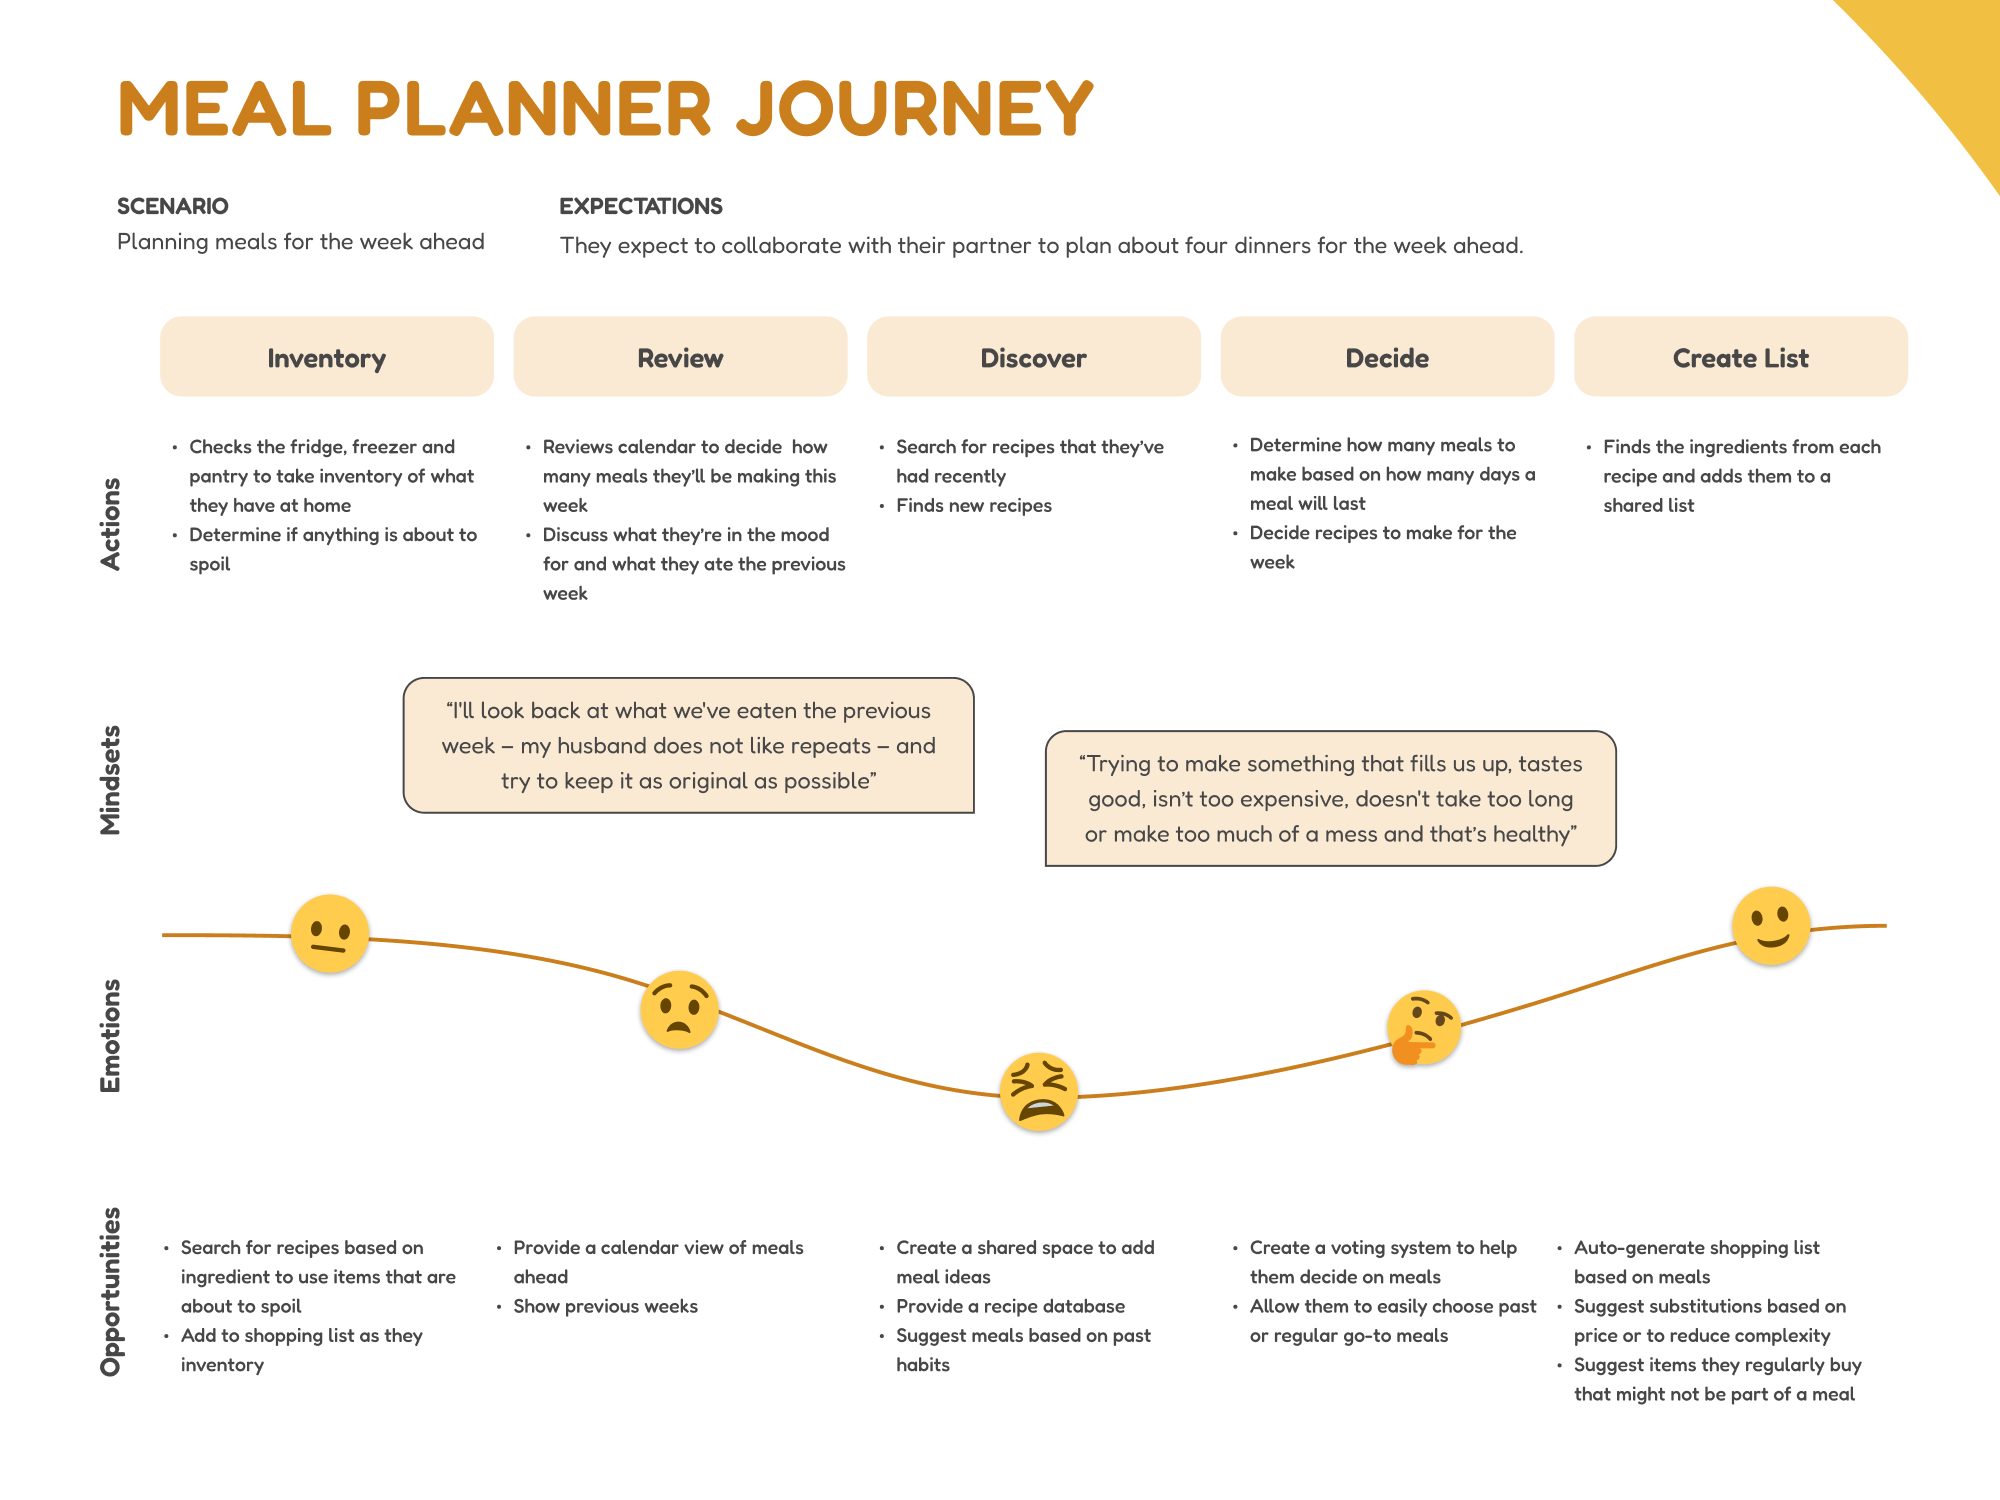 A customer journey map for the meal planner user type.